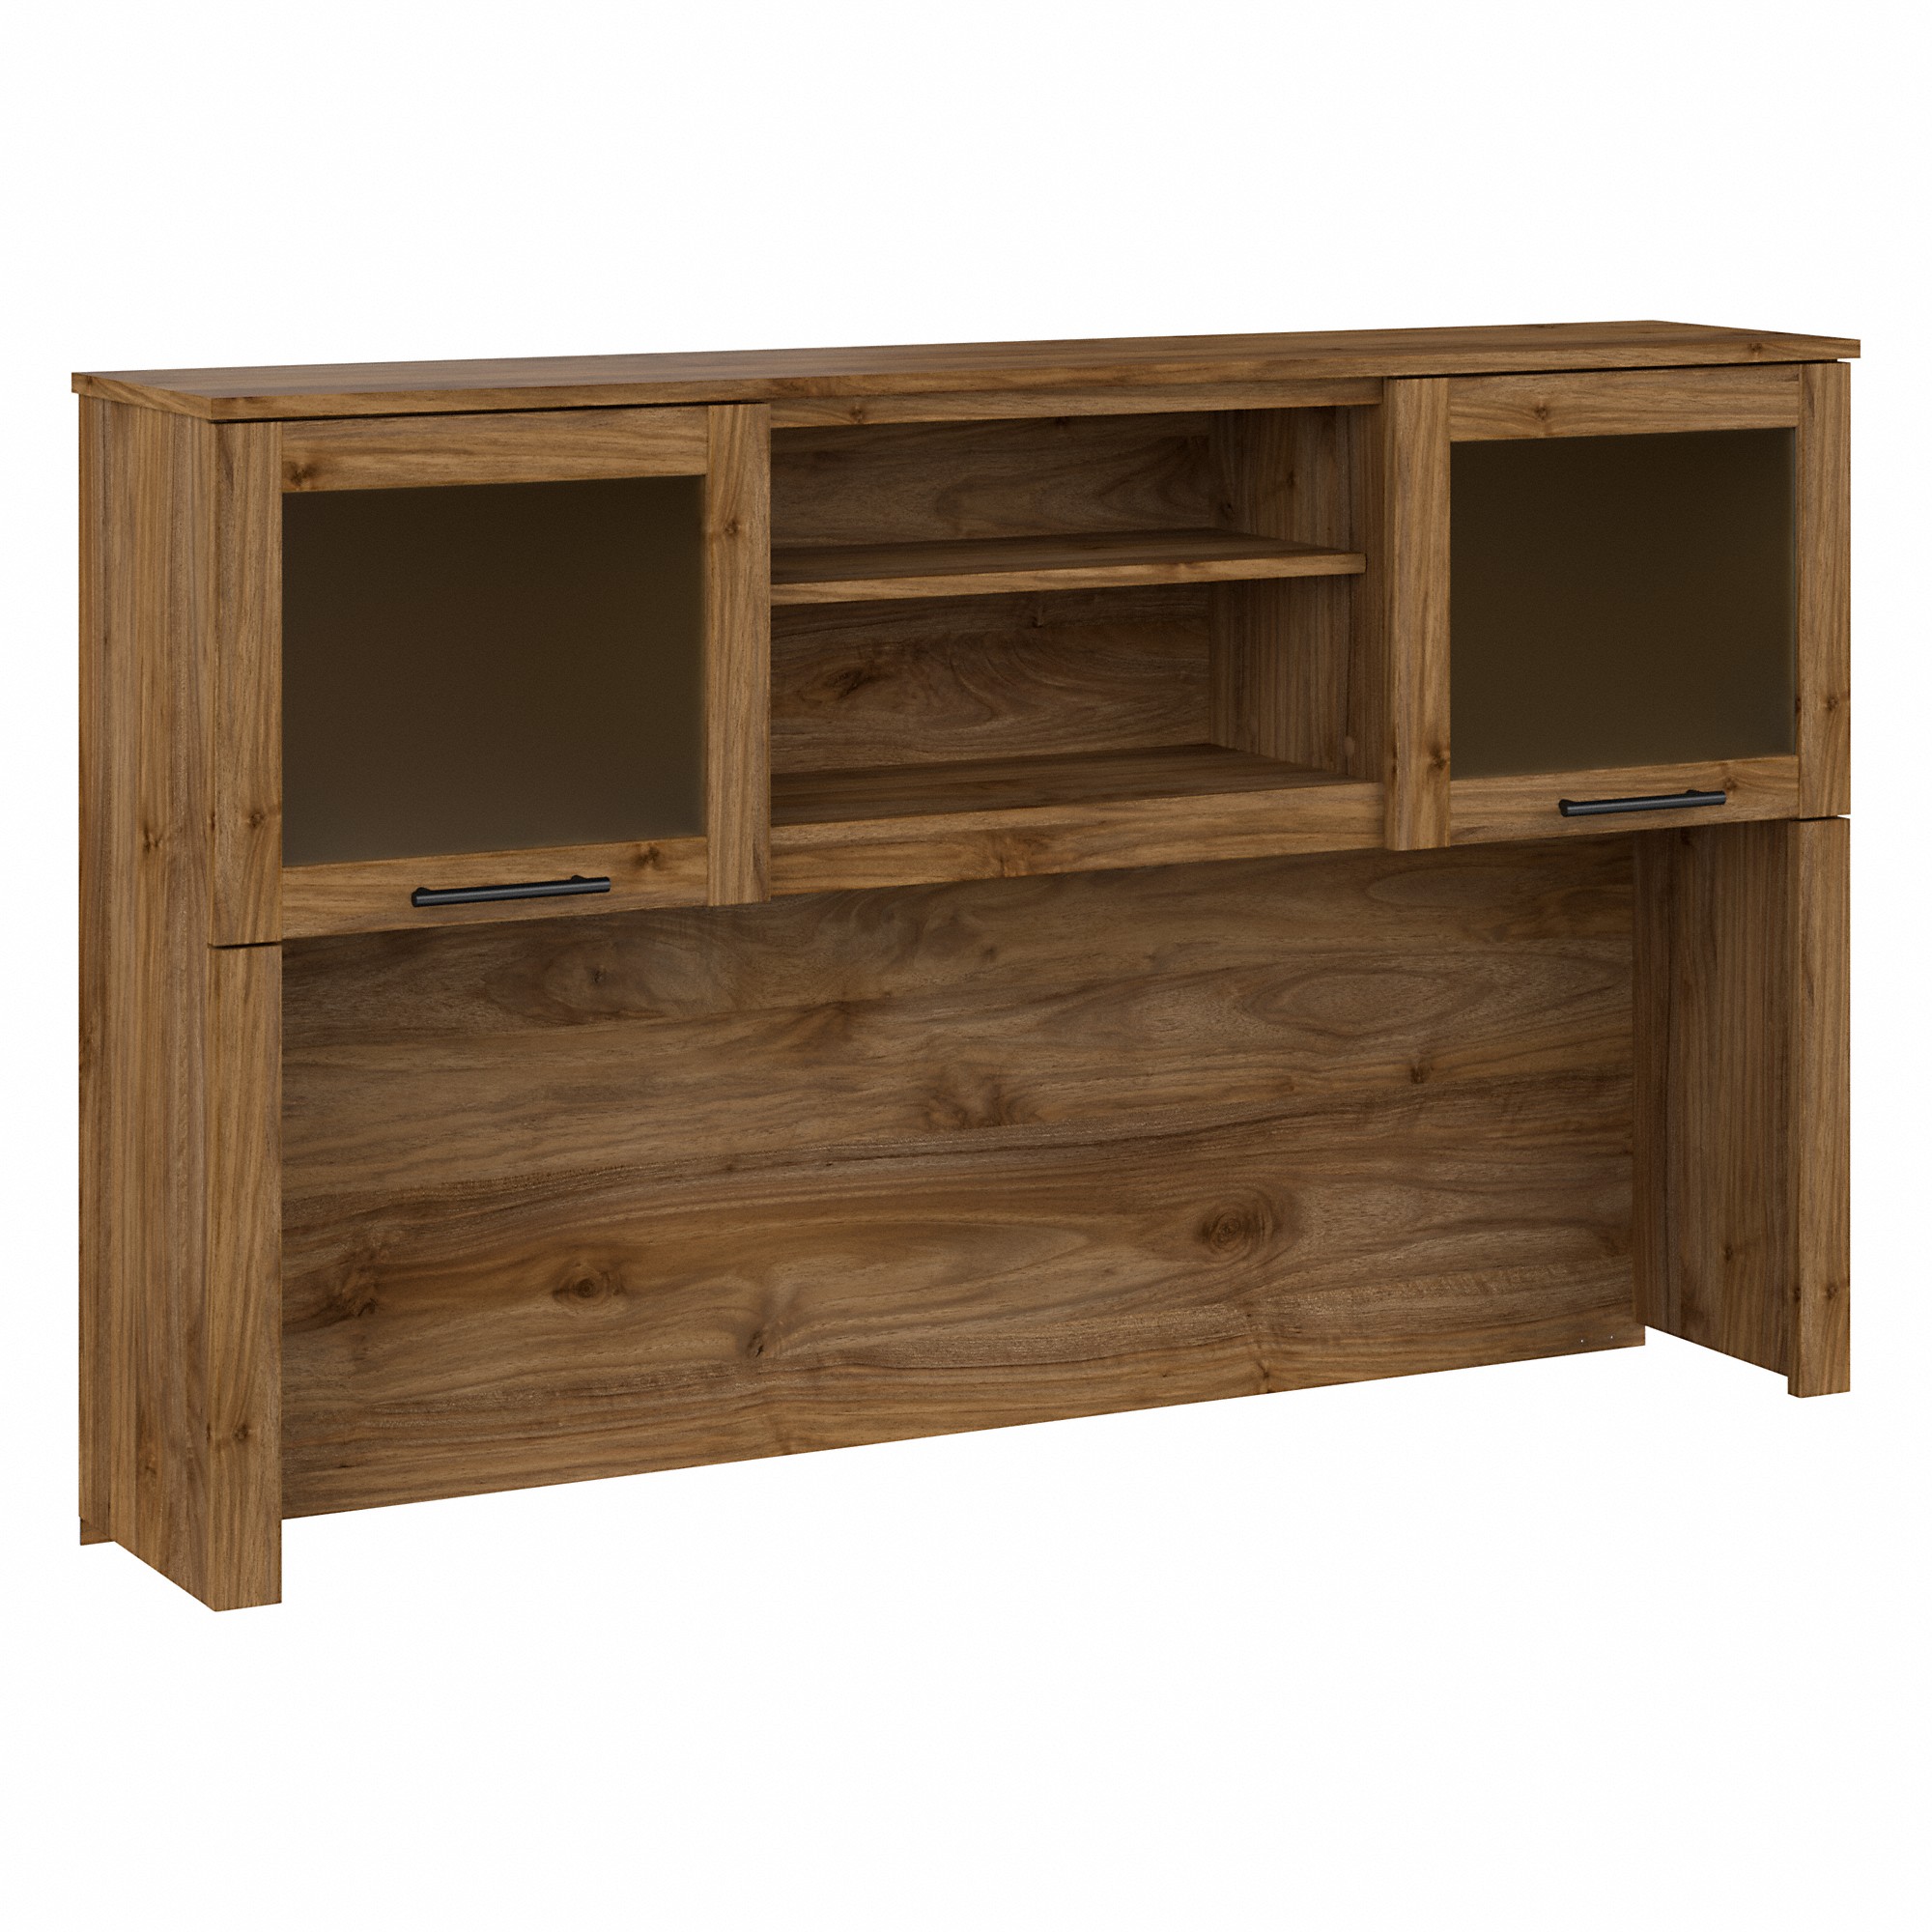 Bush Furniture Somerset 60 in 2-Door Hutch with Open Storage in Fresh Walnut - fits on Somerset 60 in L Desk (Sold Separately) - image 2 of 7